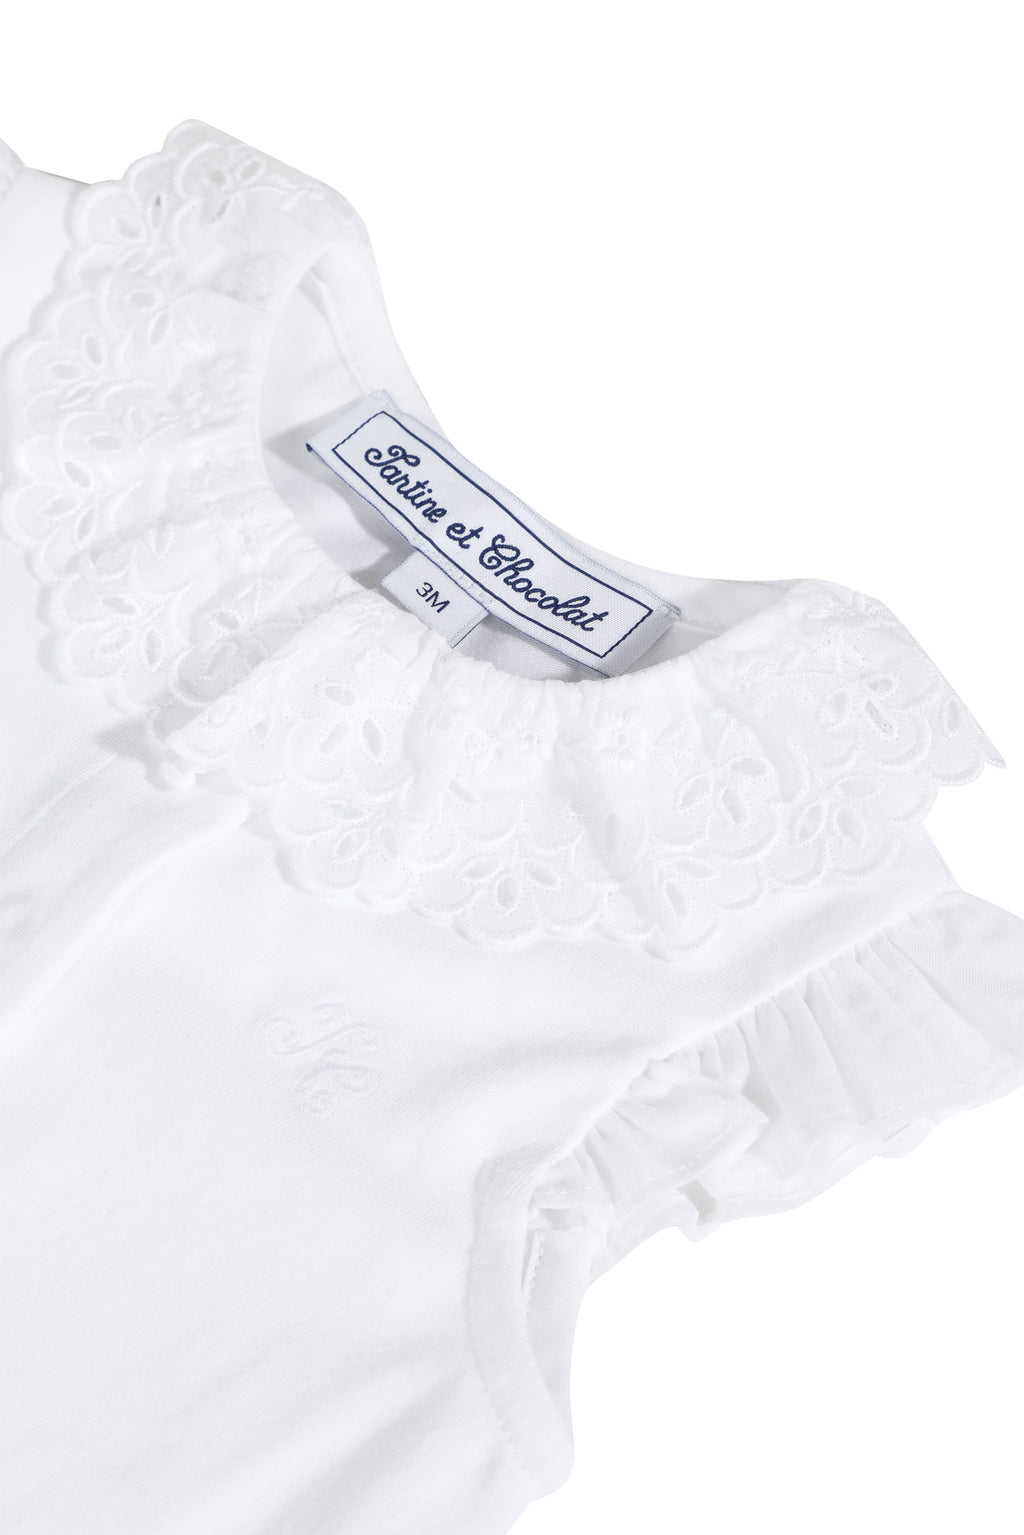 Body - blanc broderies anglaises